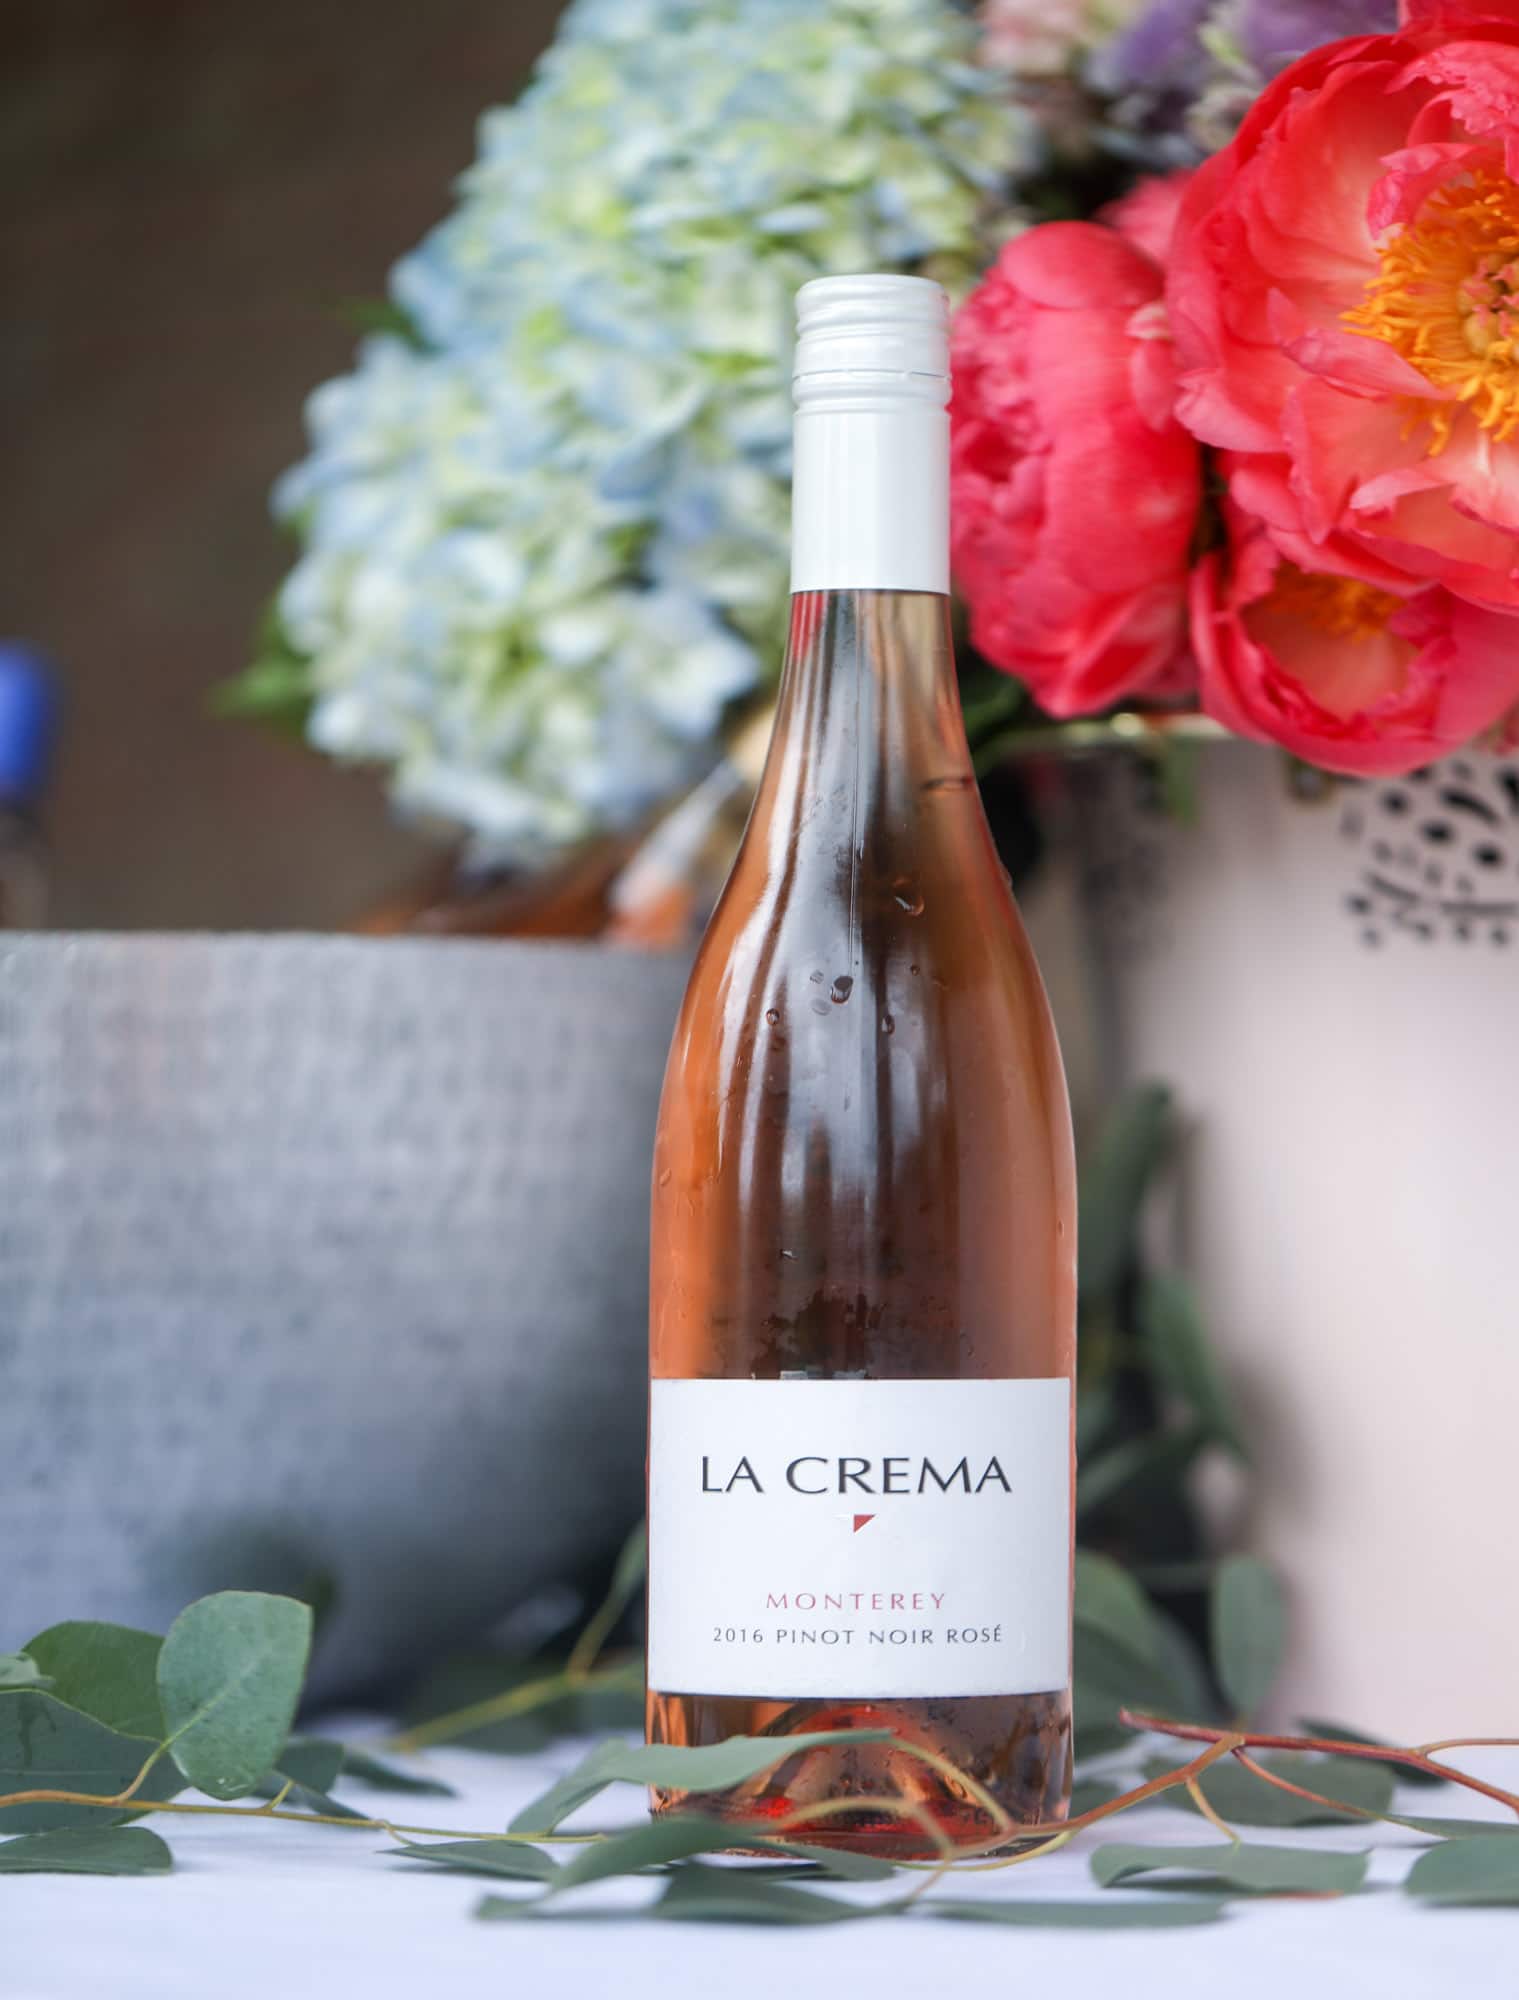 The best rosé to drink - all here in one epic summer guide for you! I'm sharing my personal favorite top ten rosé wines to drink in summer 2018, along with the perfect cheese board and snacks to go with. I howsweeteats.com #rosé #rose #summer #2018 #cheeseboard 